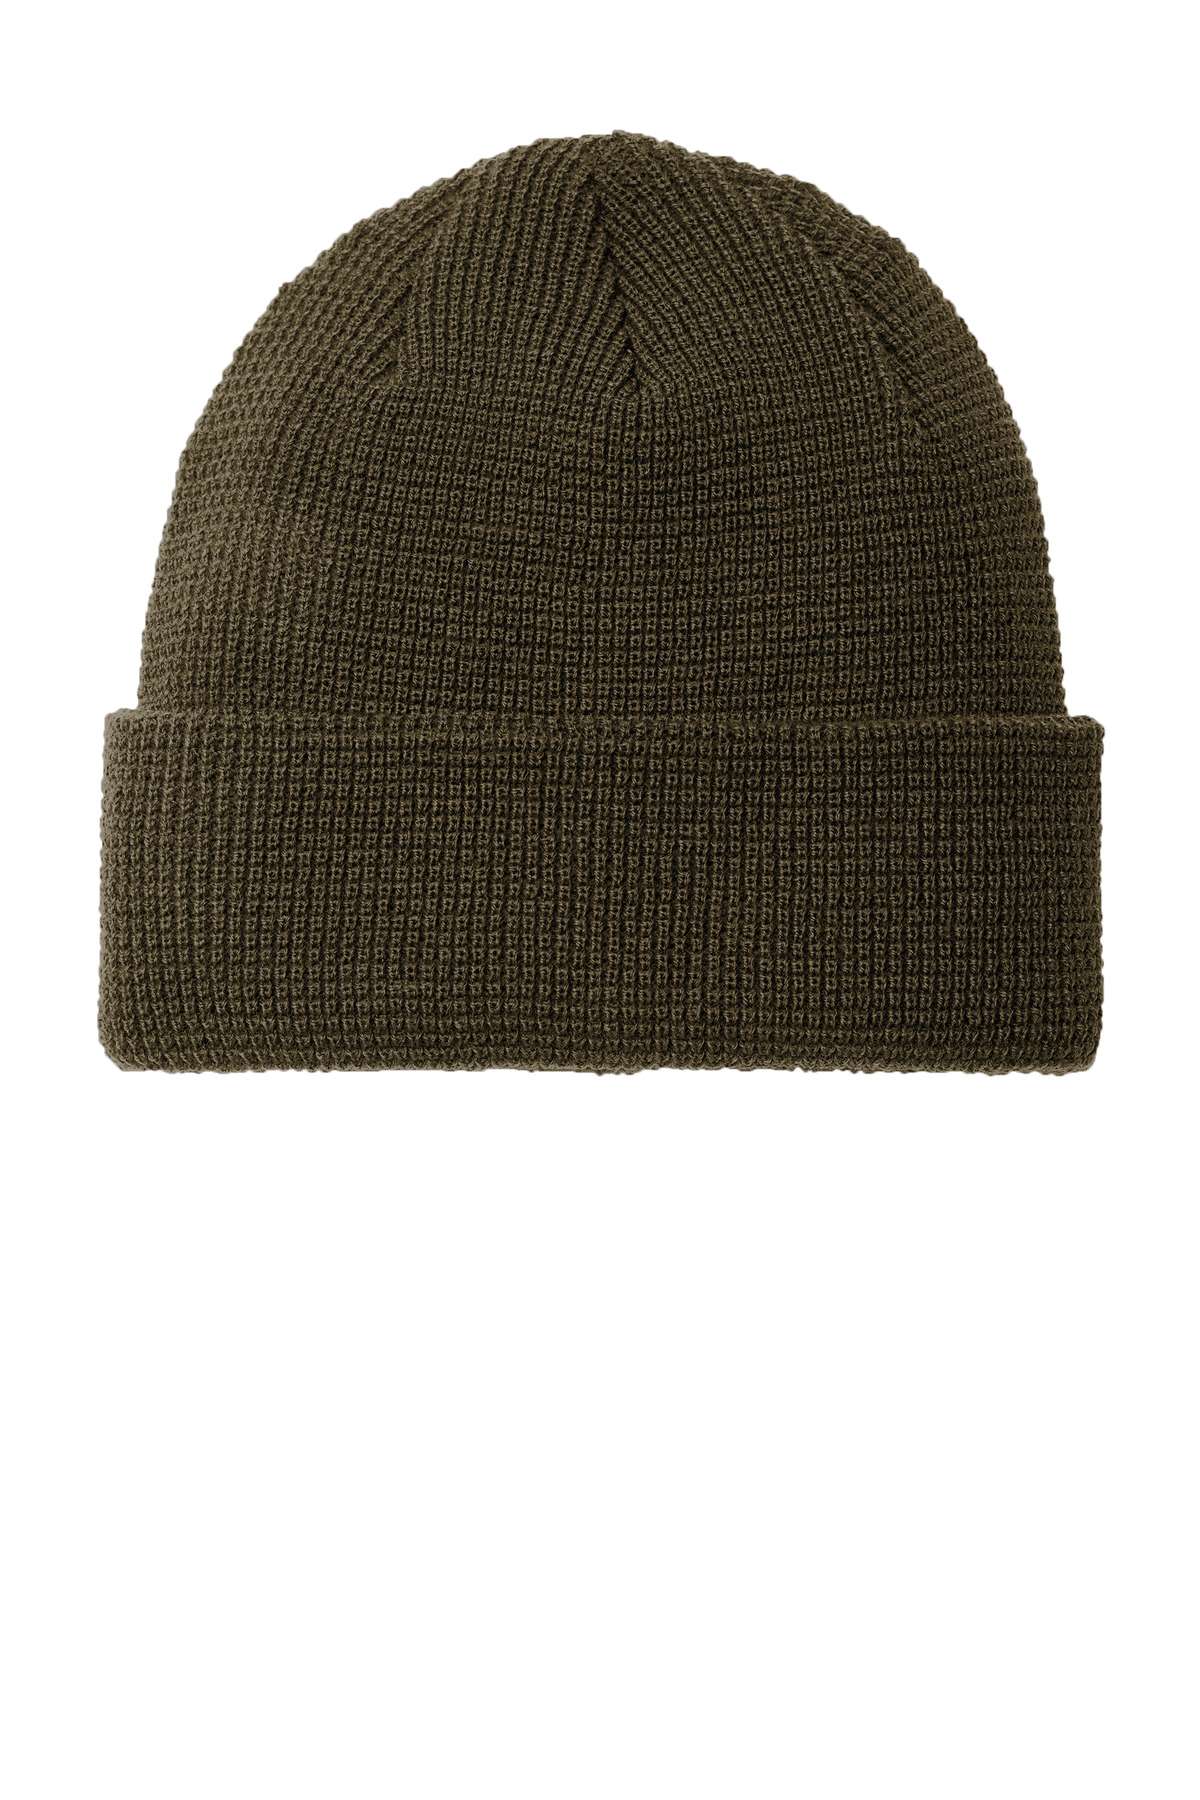 Port Authority C955 Thermal Knit Cuffed Beanie in Best Price